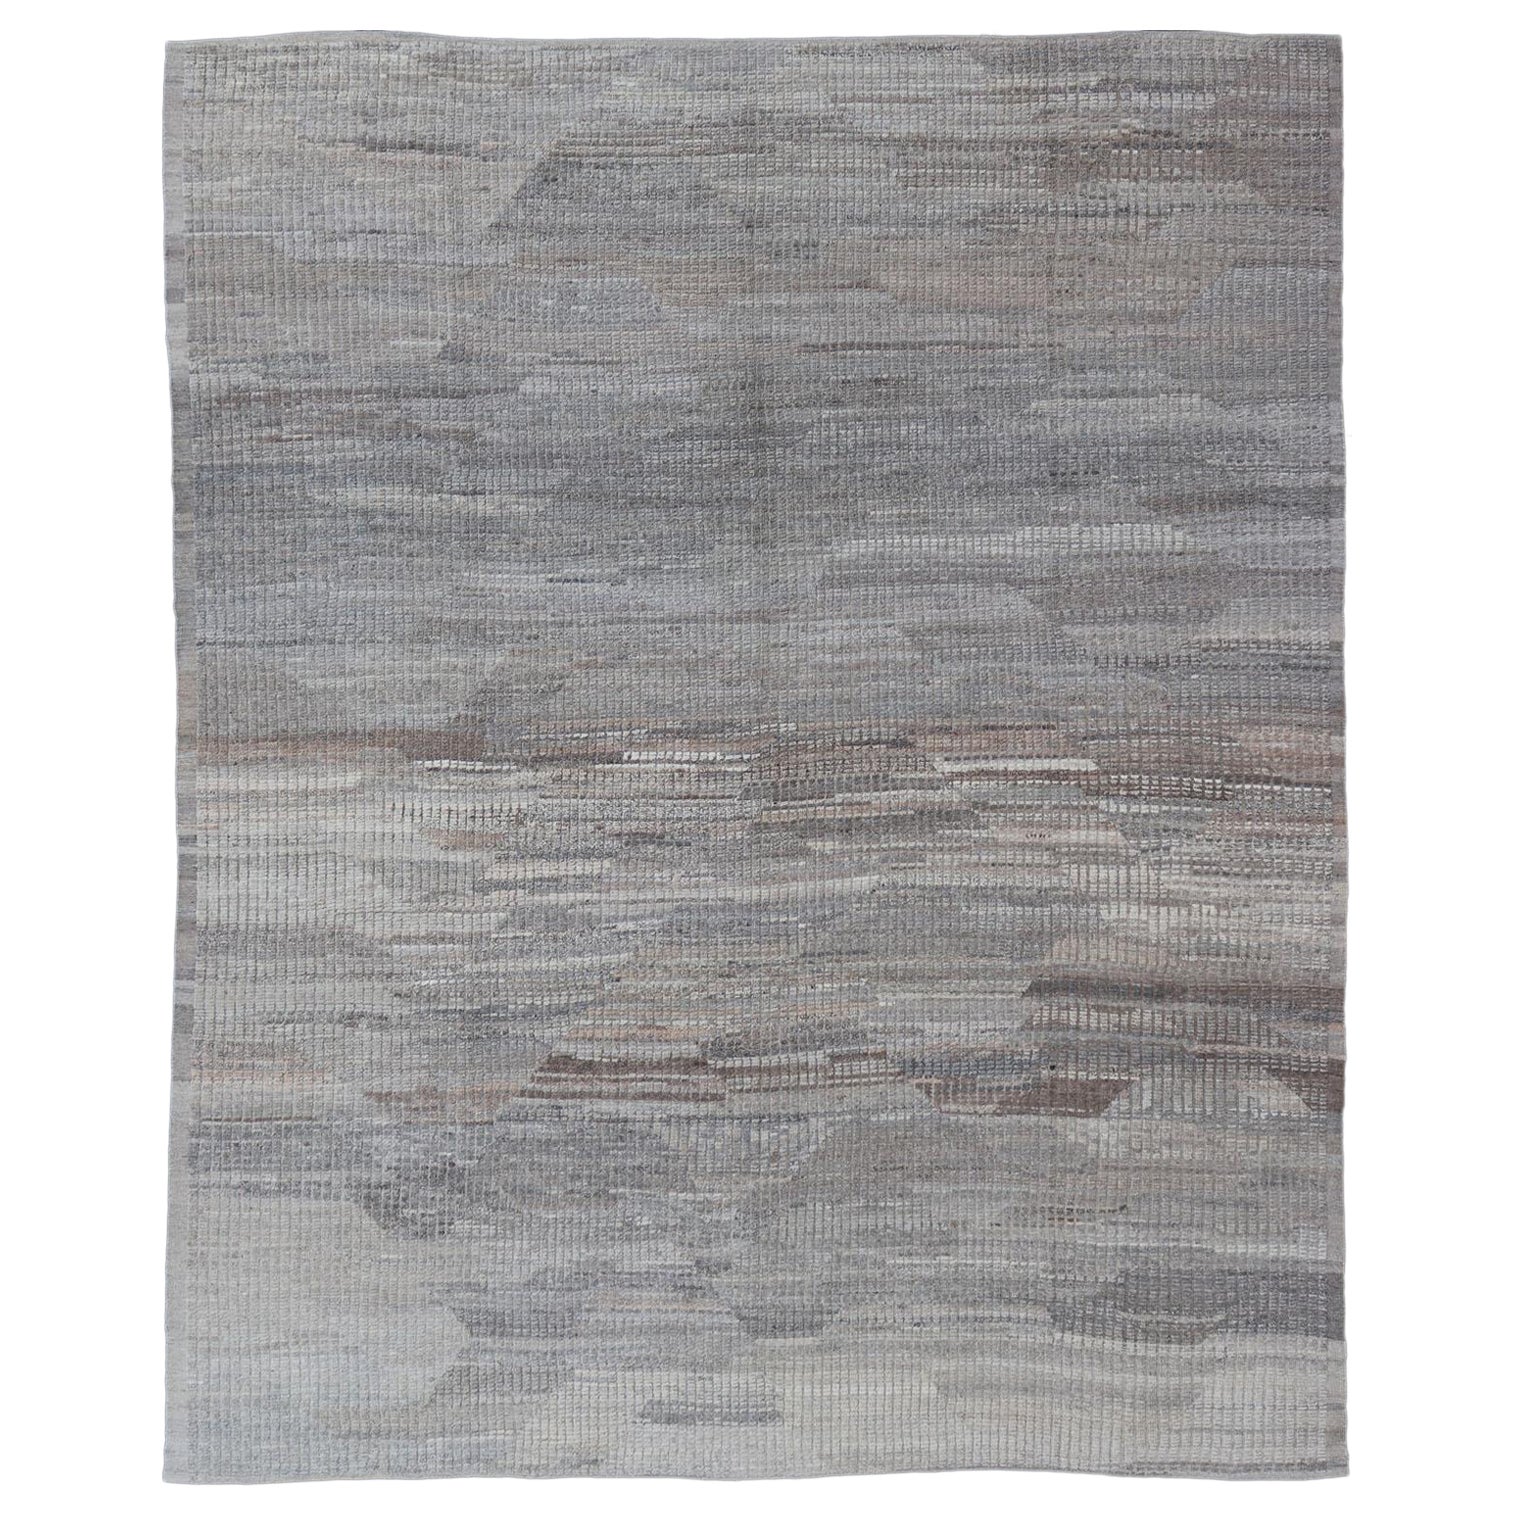 Casual Modern Rug in Neutral and Silver Gray Tones with Subdued Design